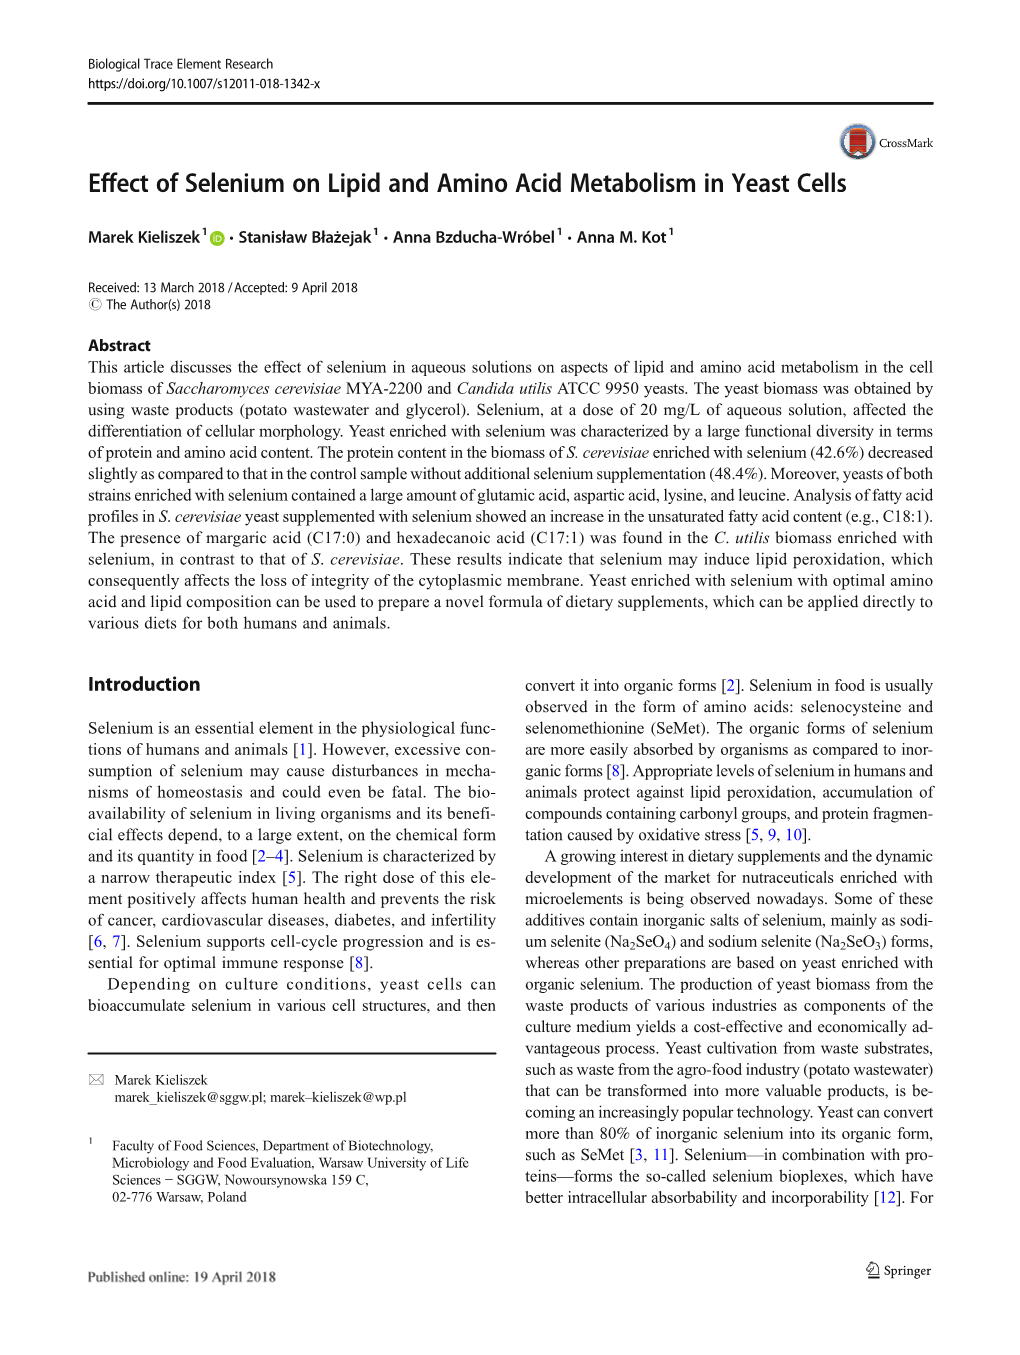 Effect of Selenium on Lipid and Amino Acid Metabolism in Yeast Cells